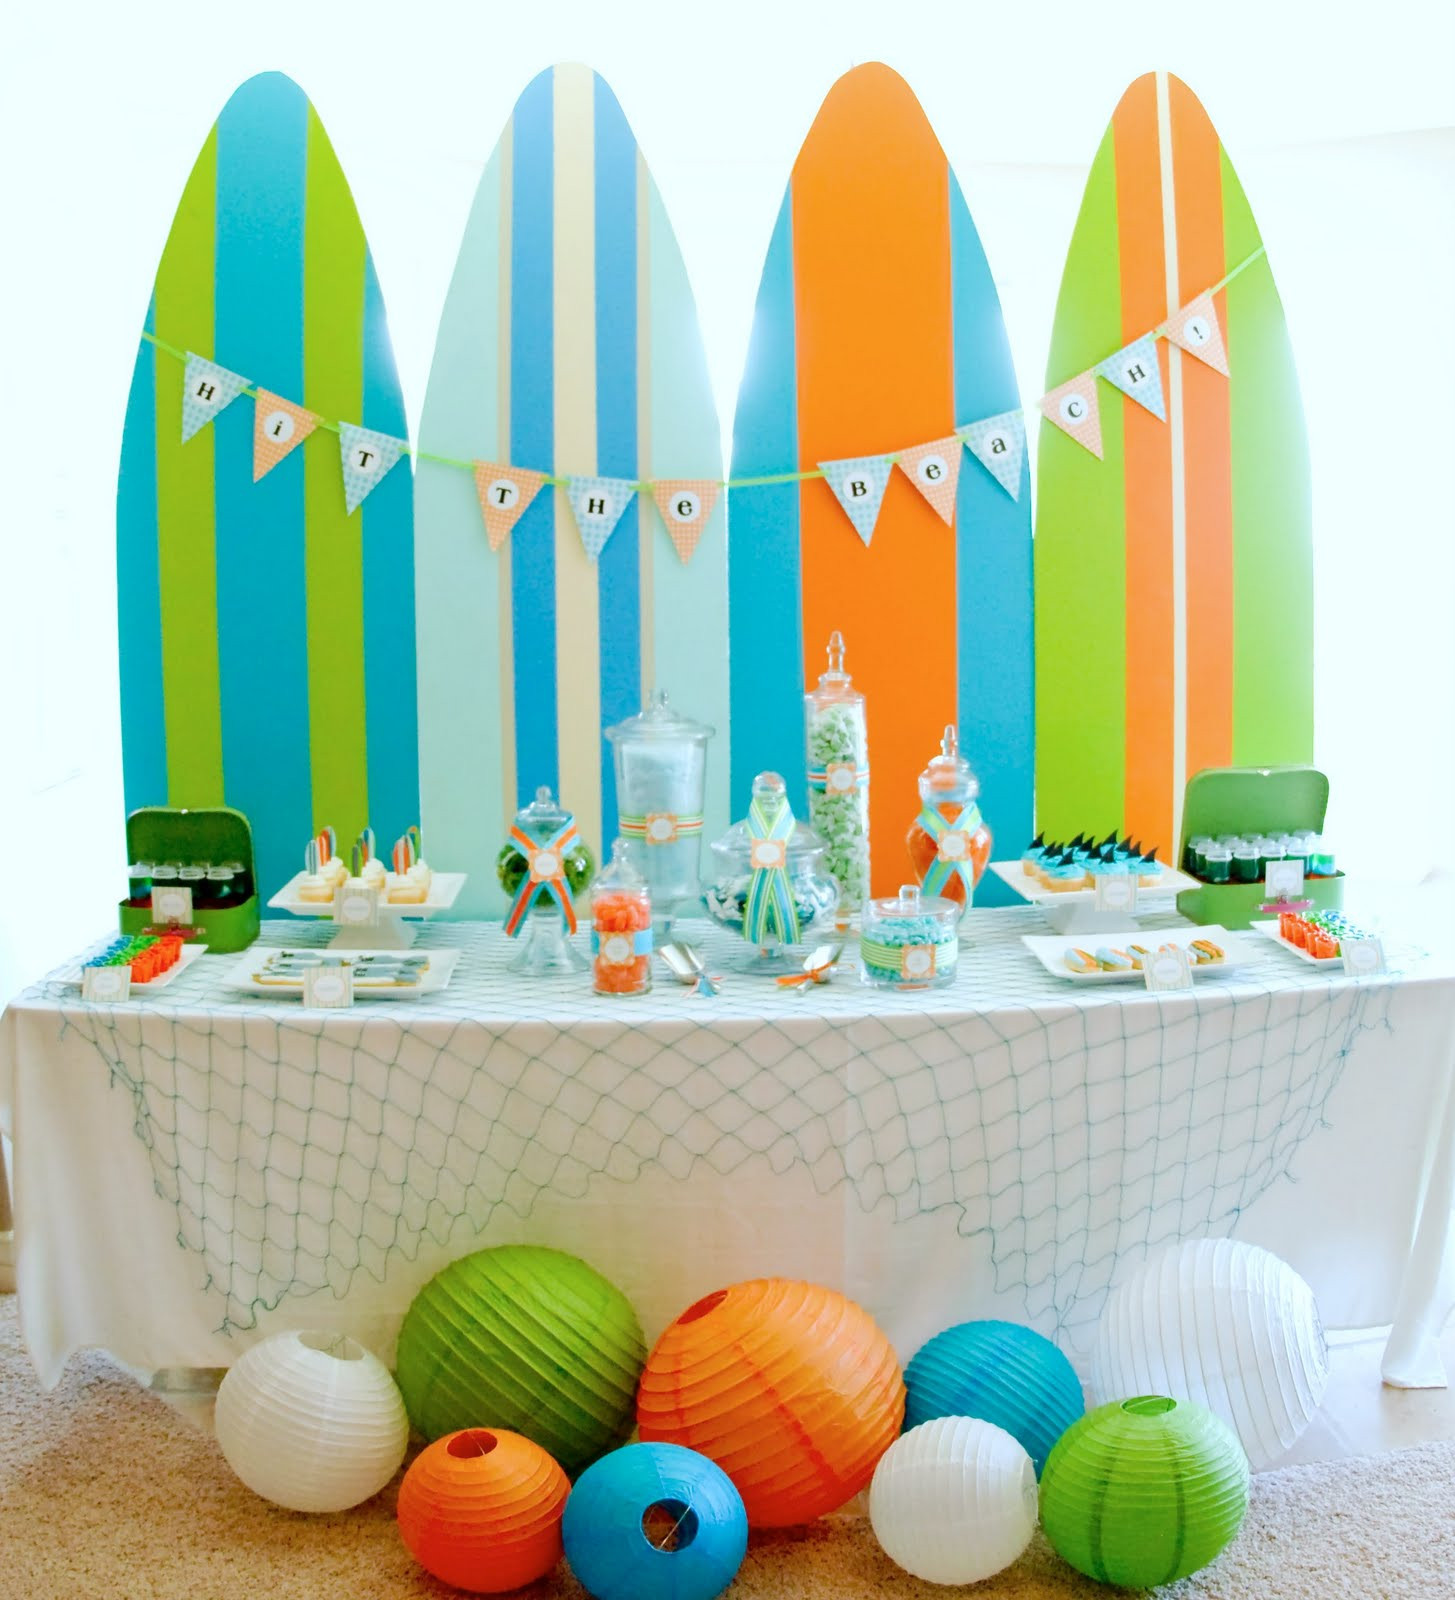 Beach Themed Party Ideas
 Kara s Party Ideas Surf s Up Summer Pool Party